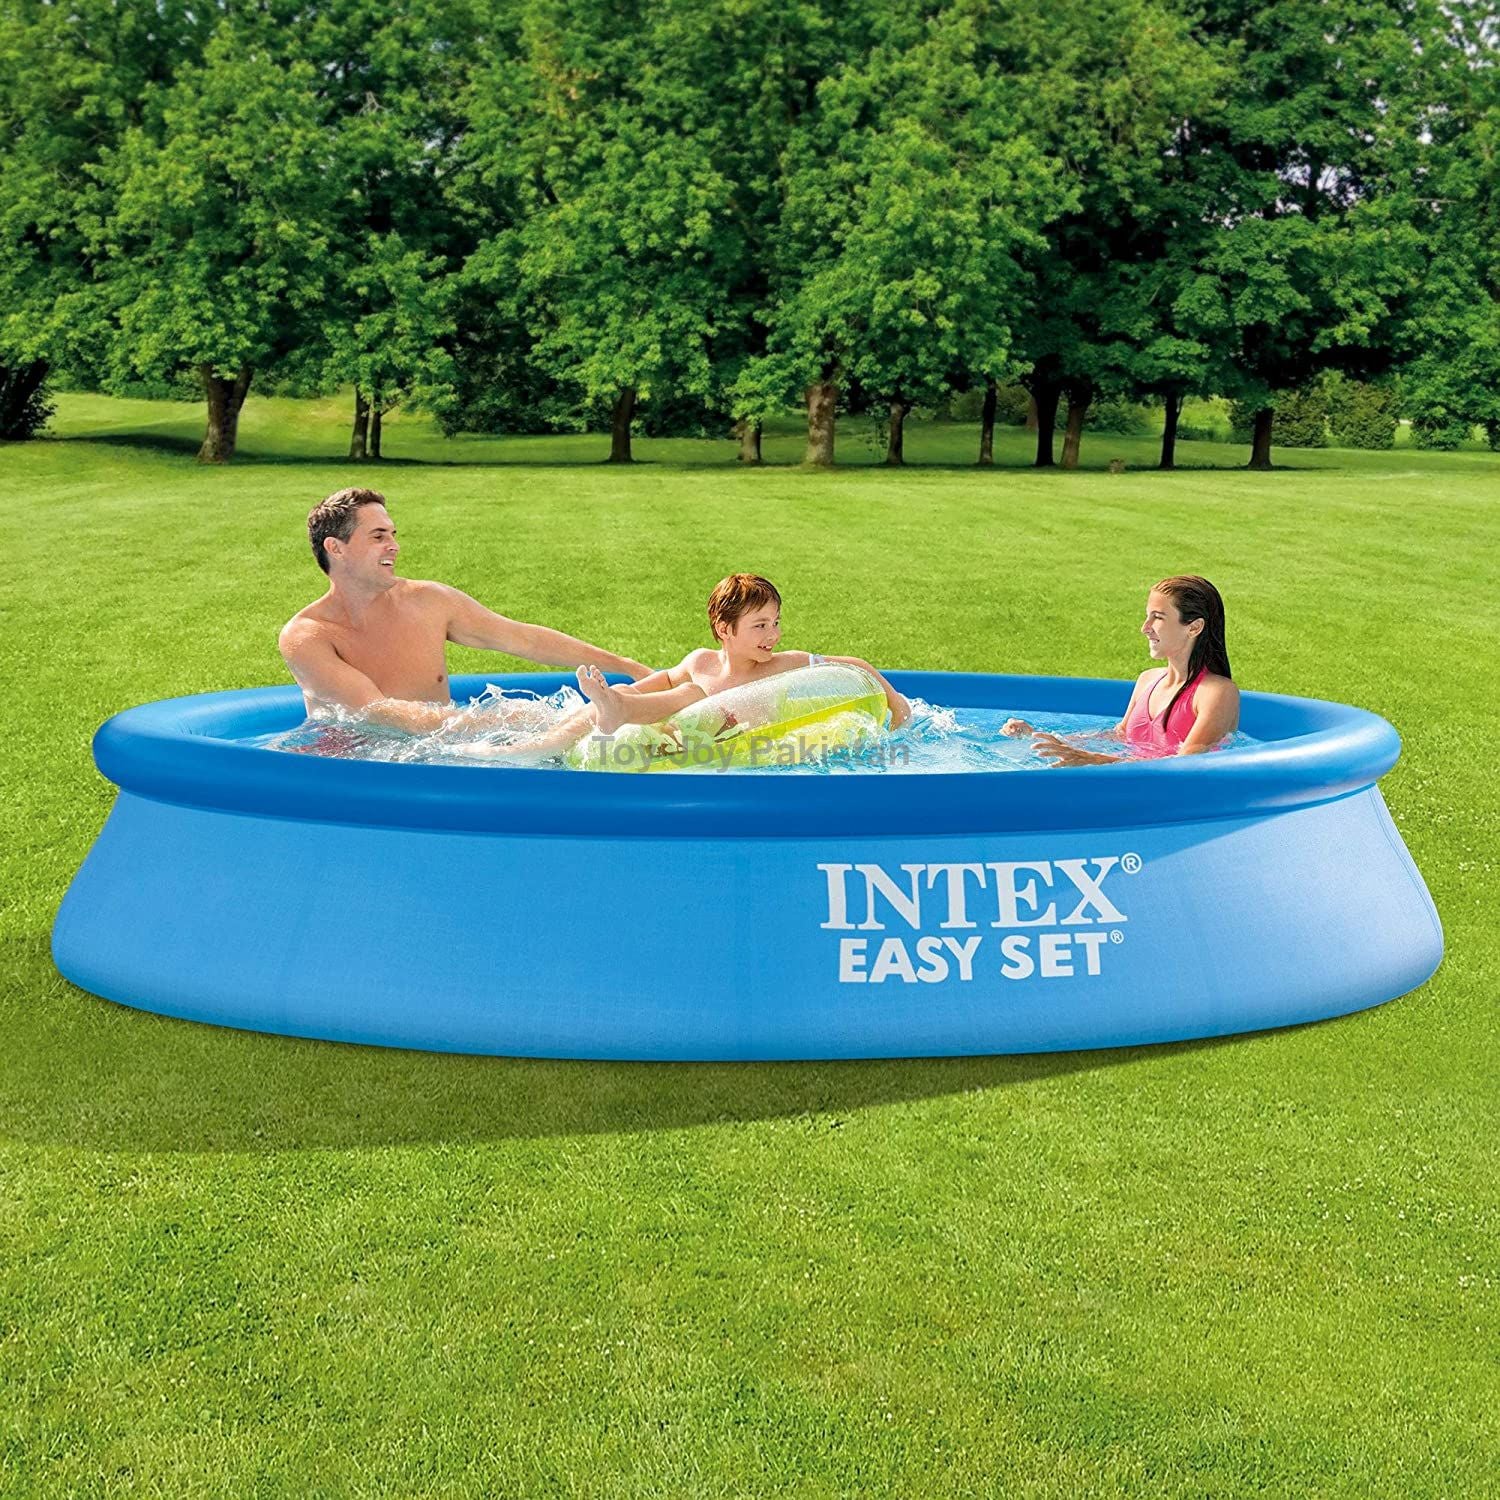 INTEX Easy Set Inflatable Puncture